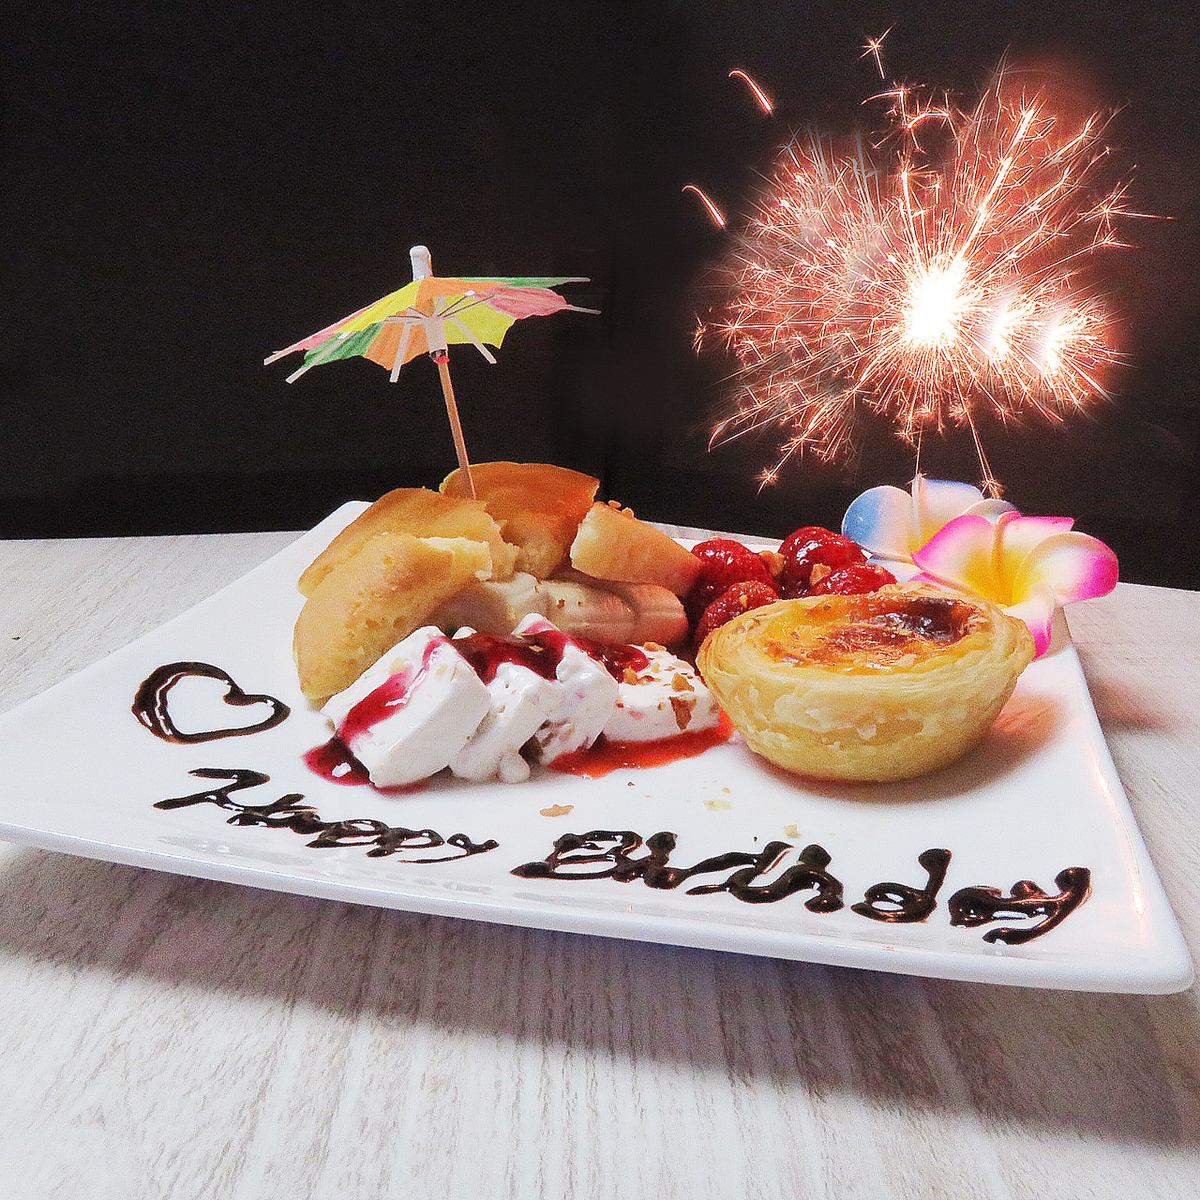 We will serve plates to customers who make reservations on birthdays and anniversaries ♪